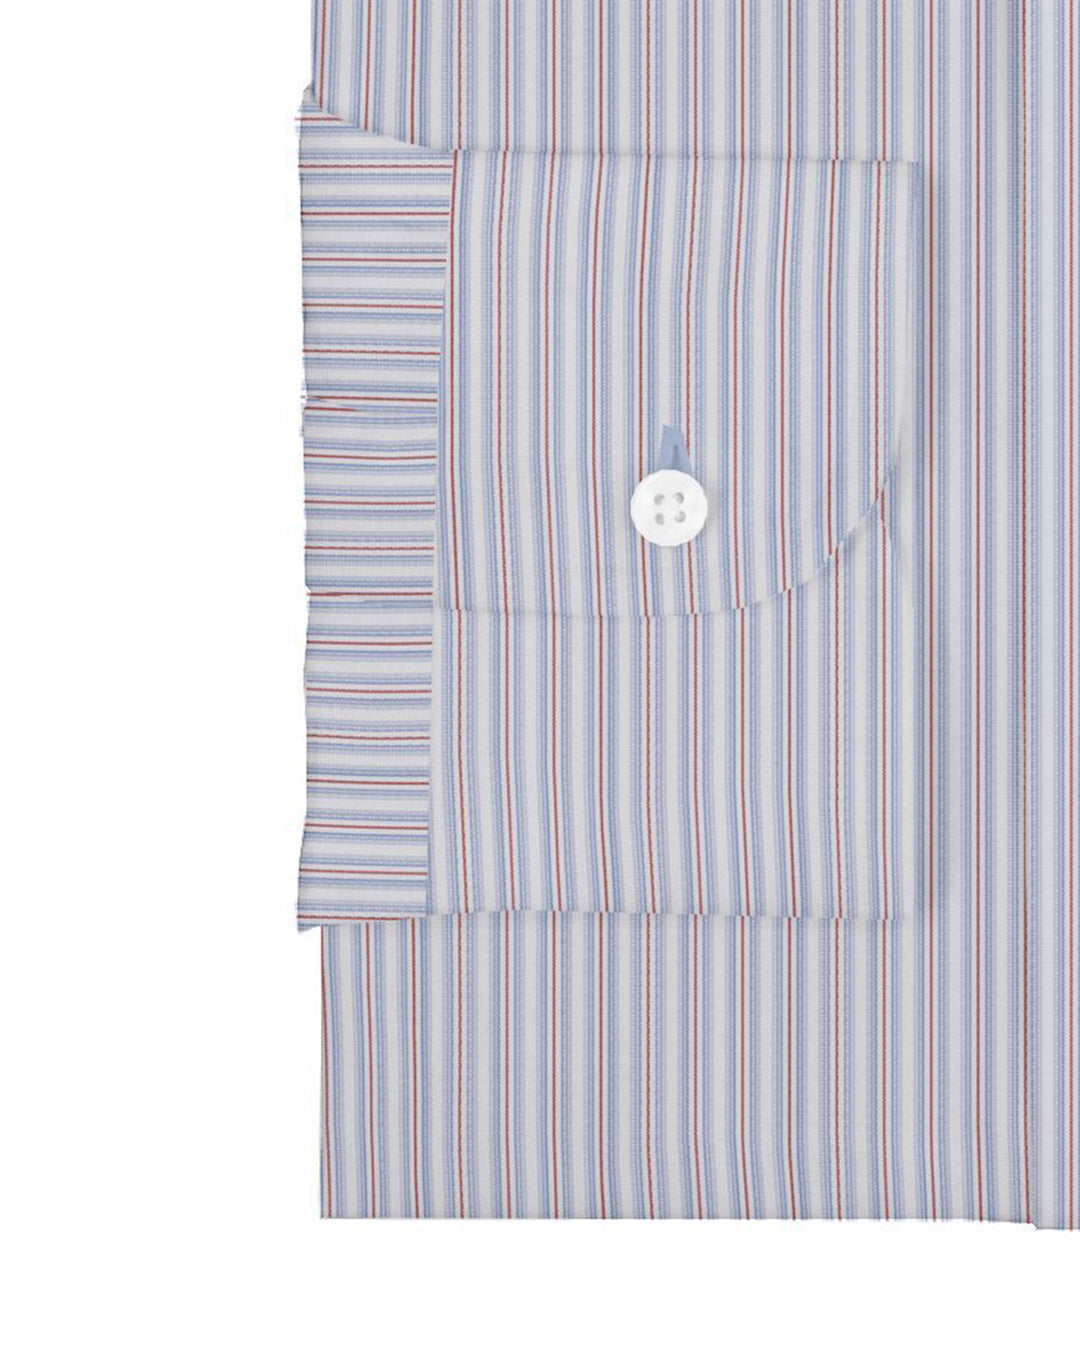 Cuff of the custom linen shirt for men in grey with blue and red stripes by Luxire Clothing